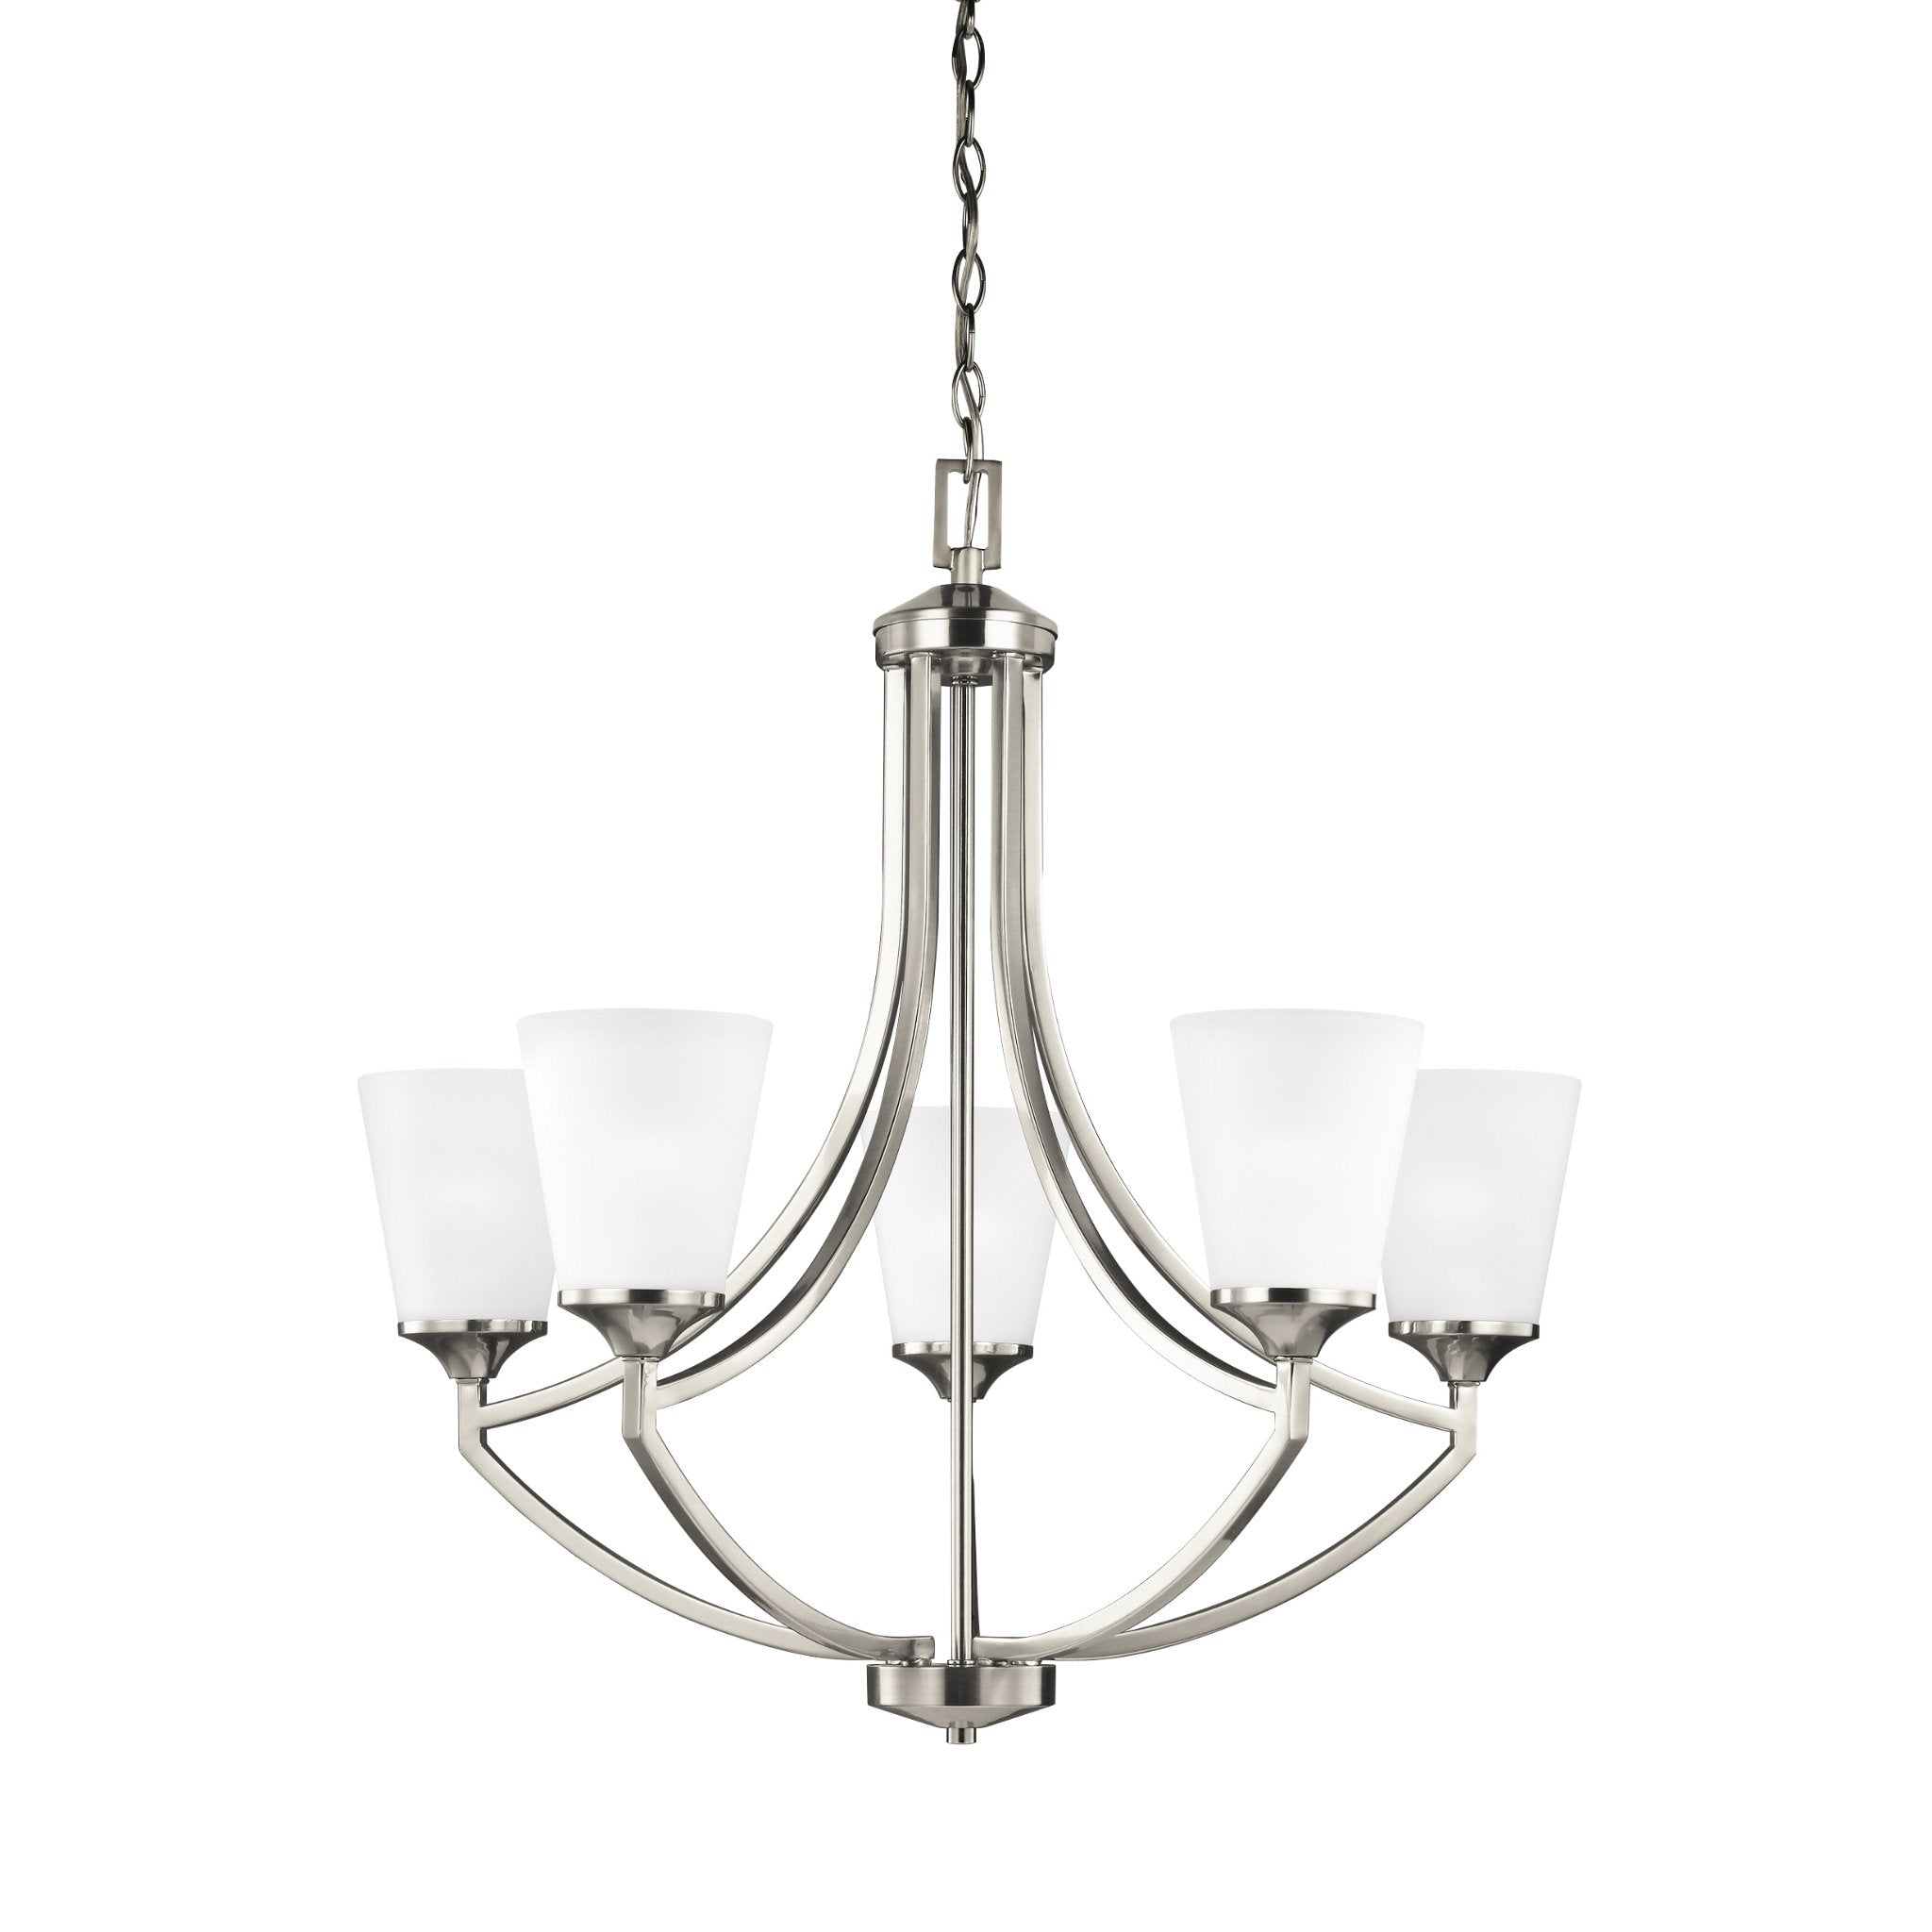 Hanford Five Light Chandelier Transitional 27.625" Height Steel Round Satin Etched Shade in Brushed Nickel